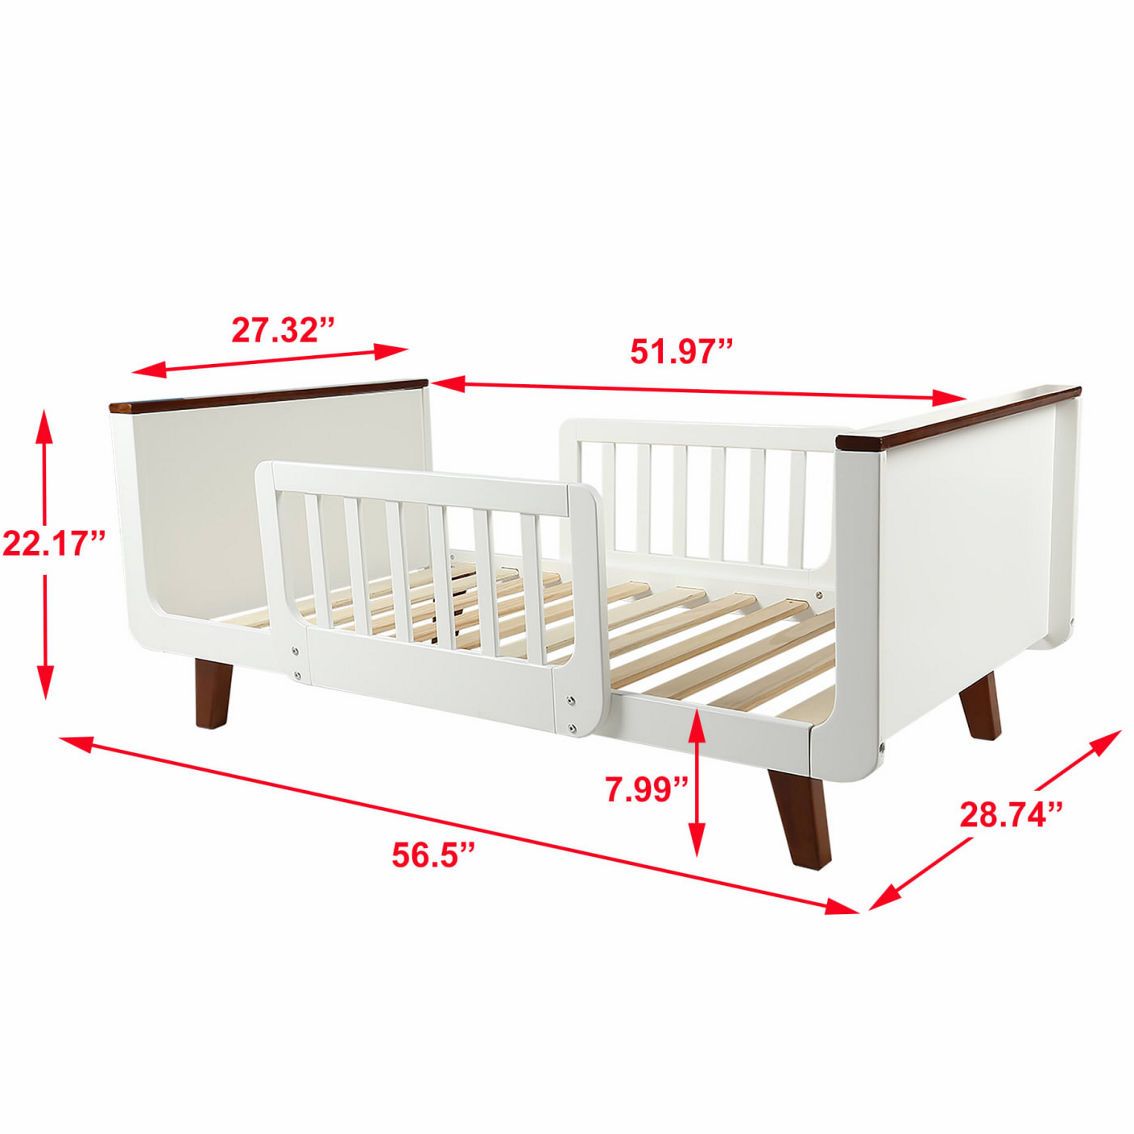 Little Partners MOD Toddler Bed - Image 4 of 5